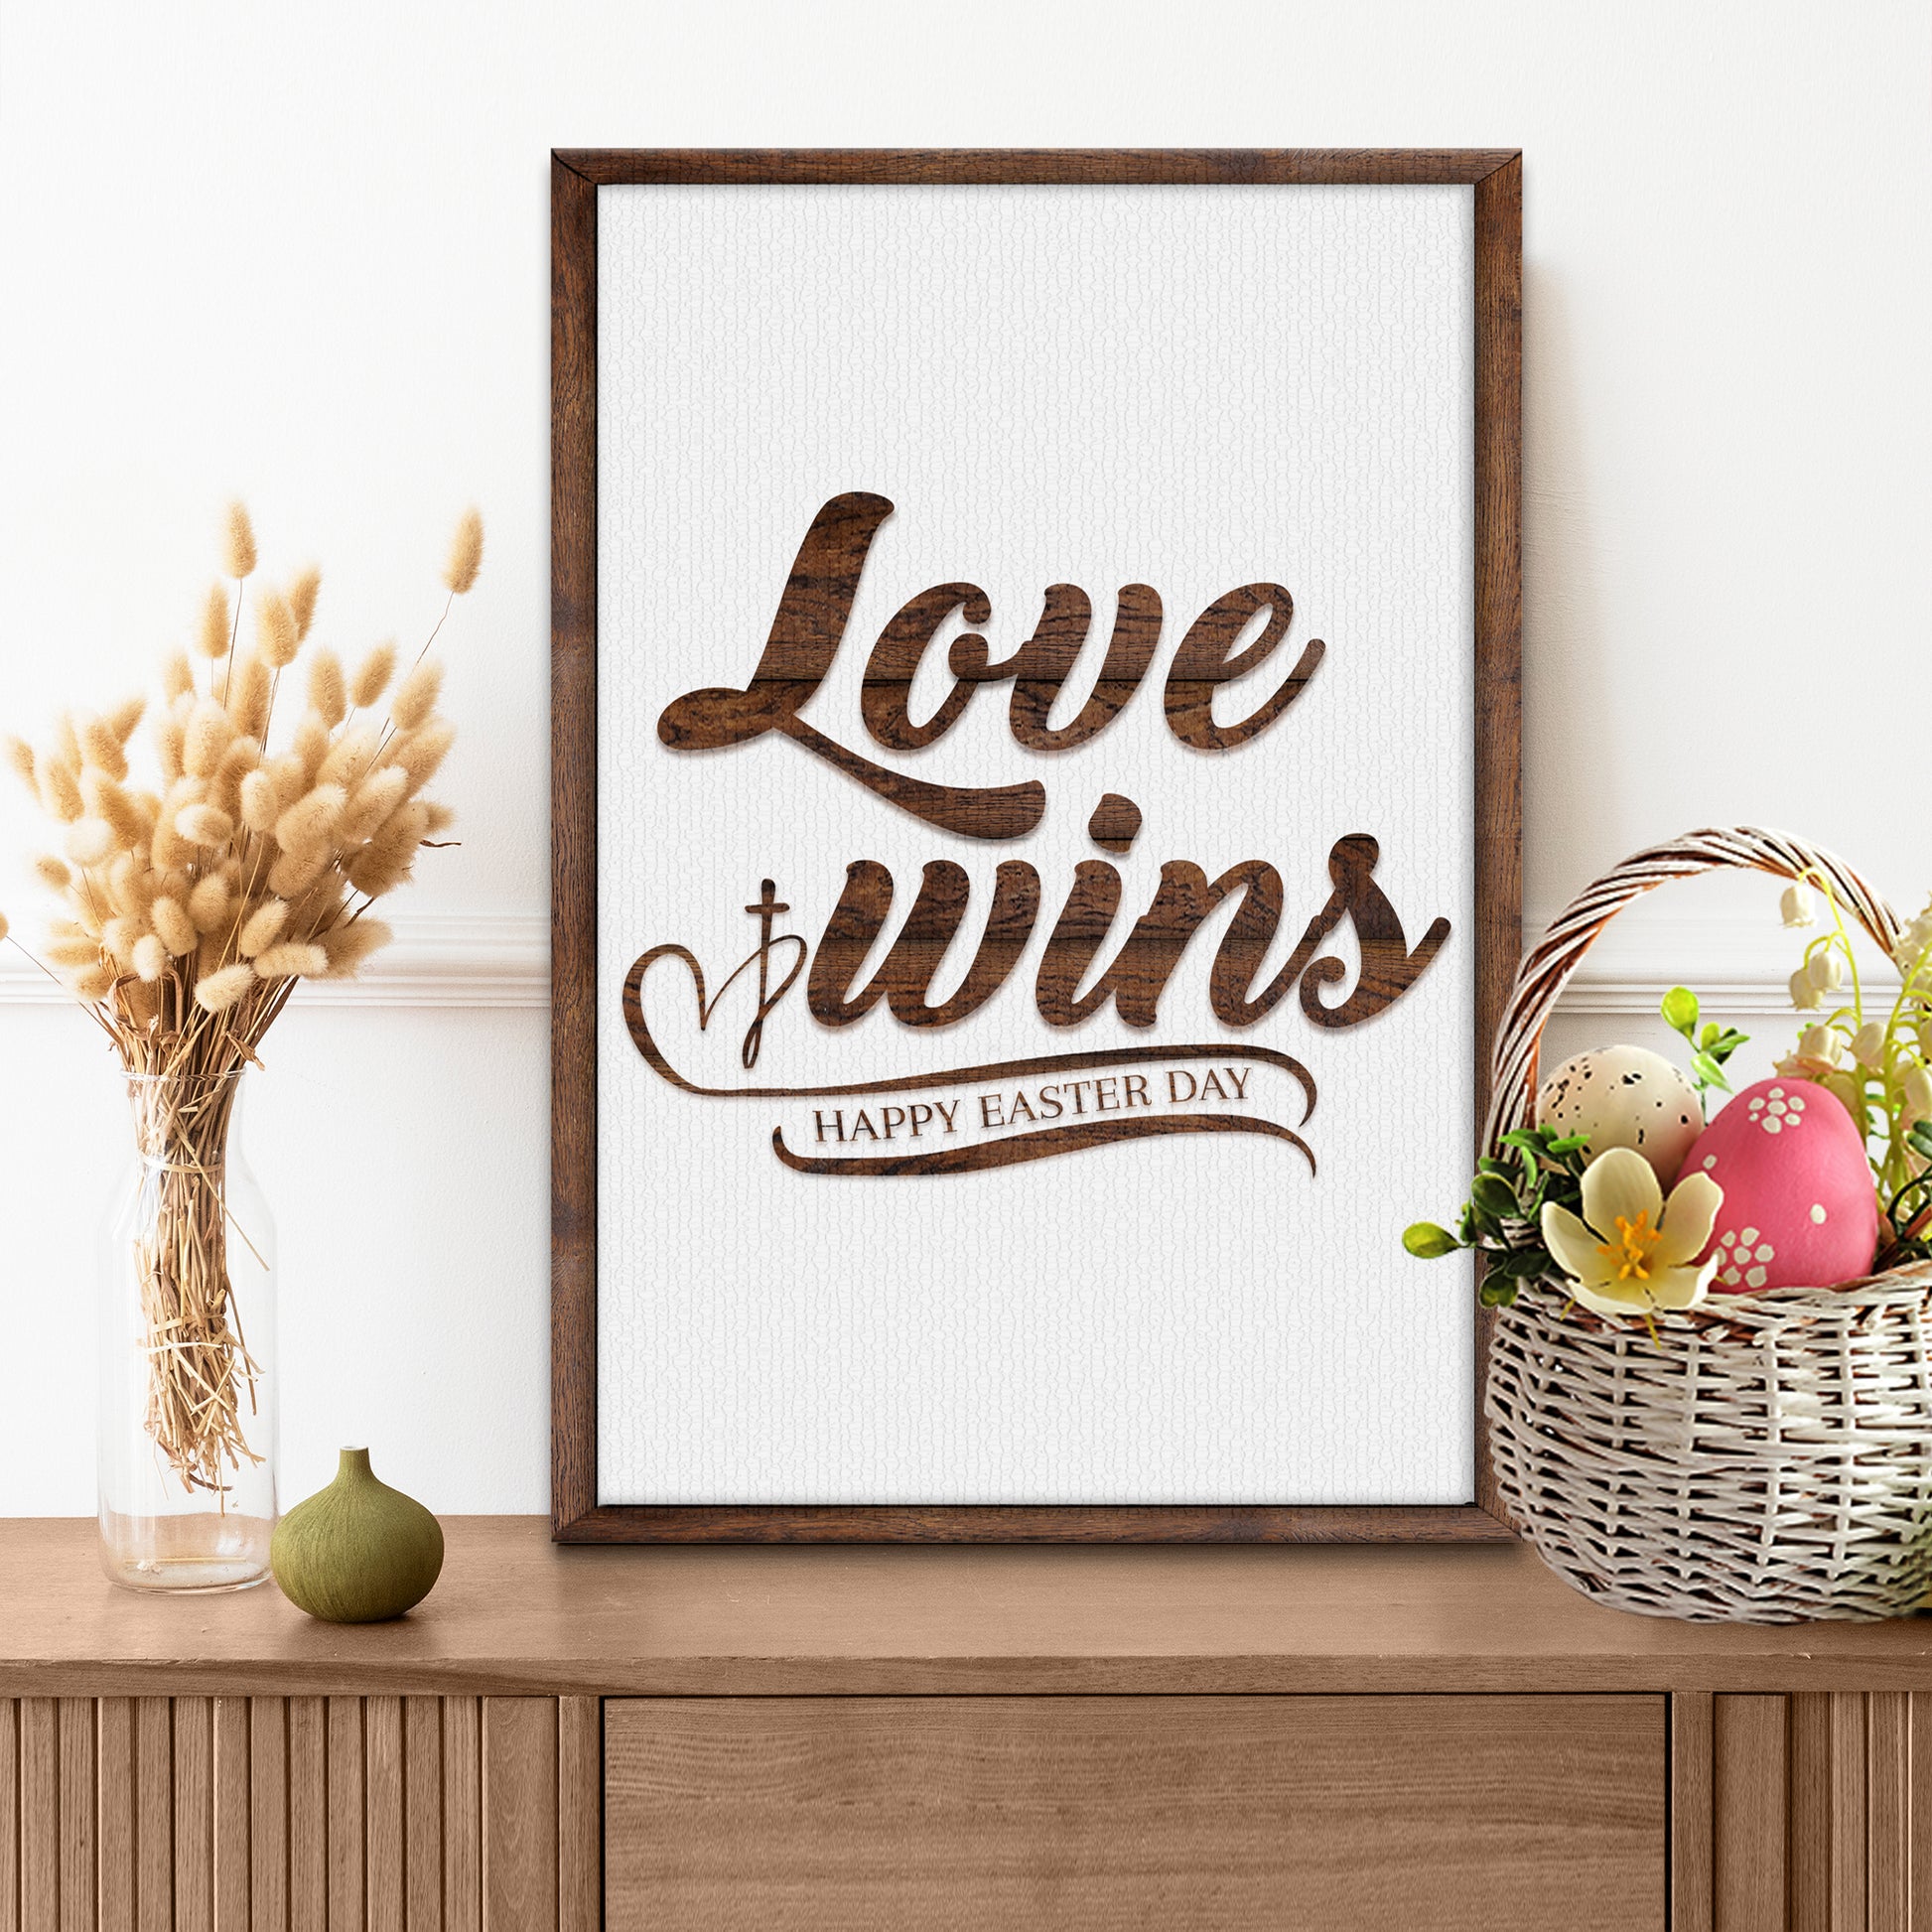 Easter Love Wins Sign - Image by Tailored Canvases